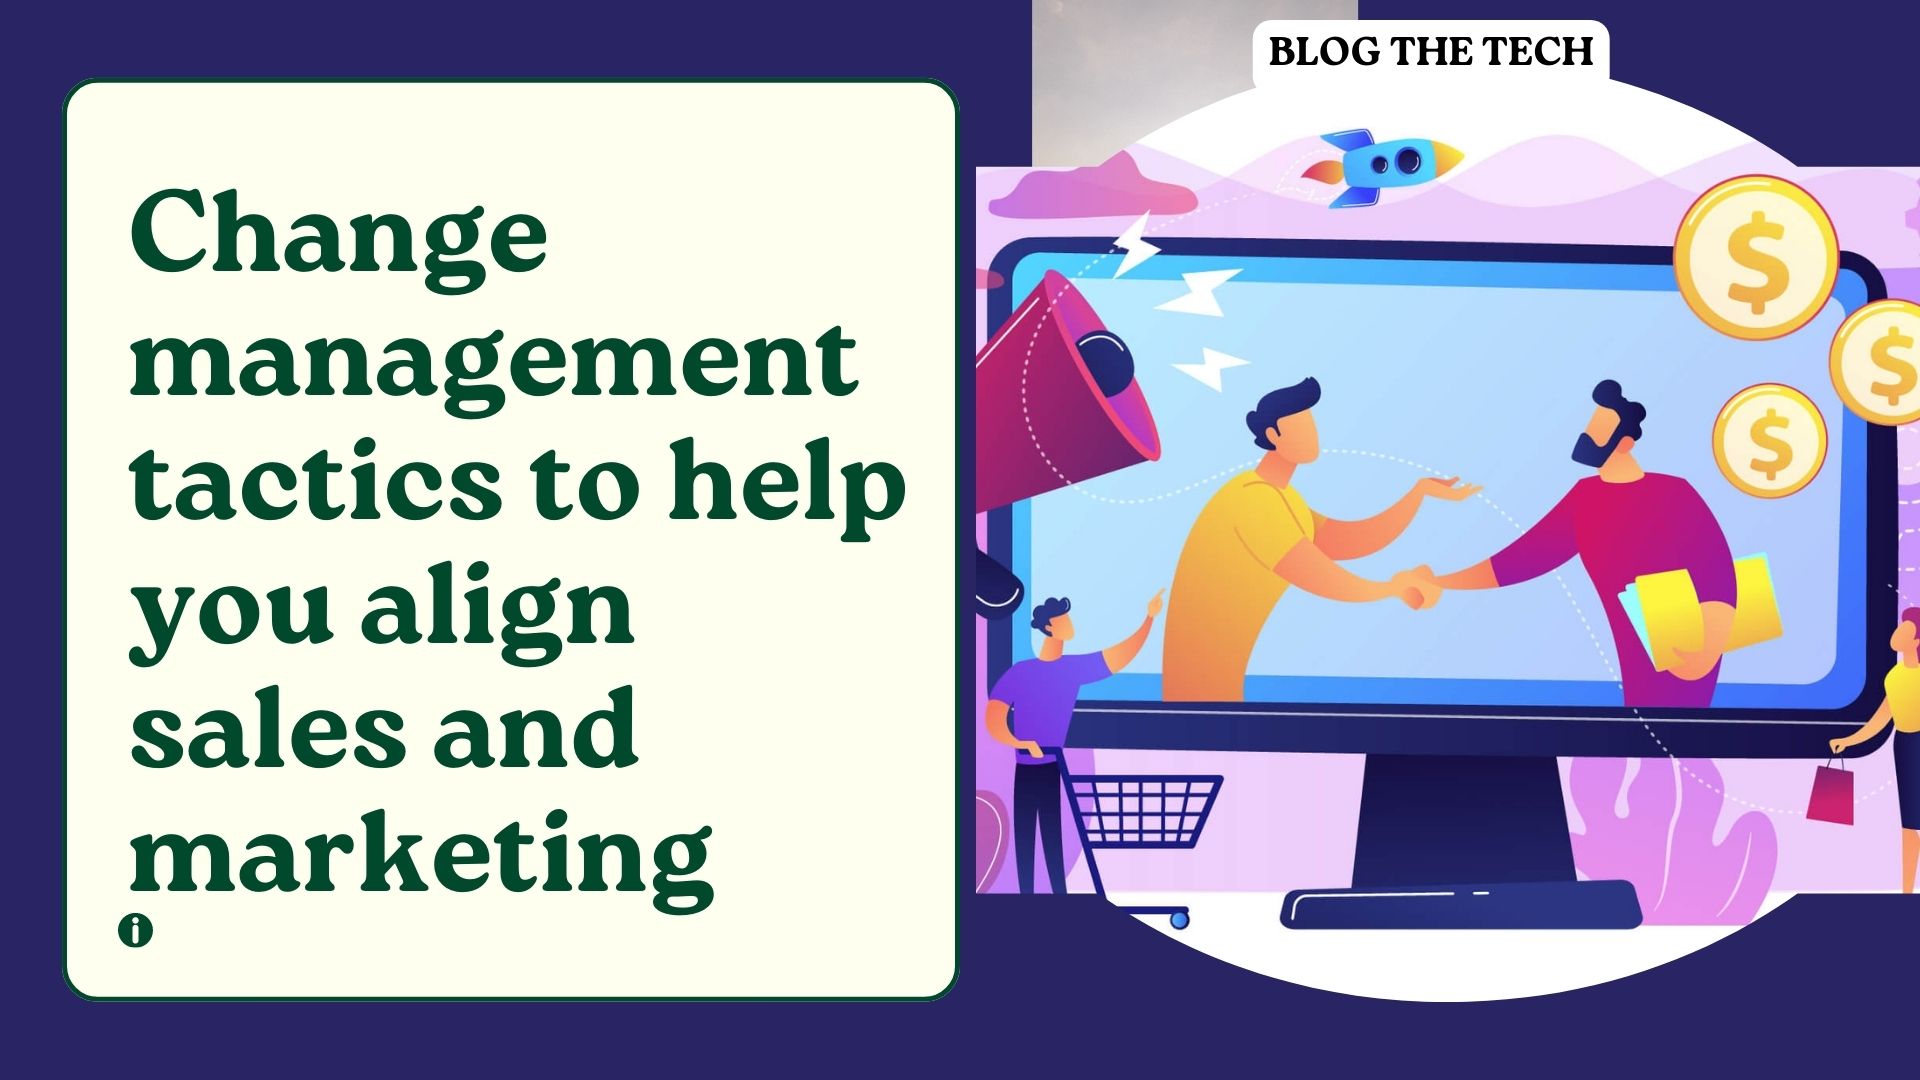 Change management tactics to help you align sales and marketing